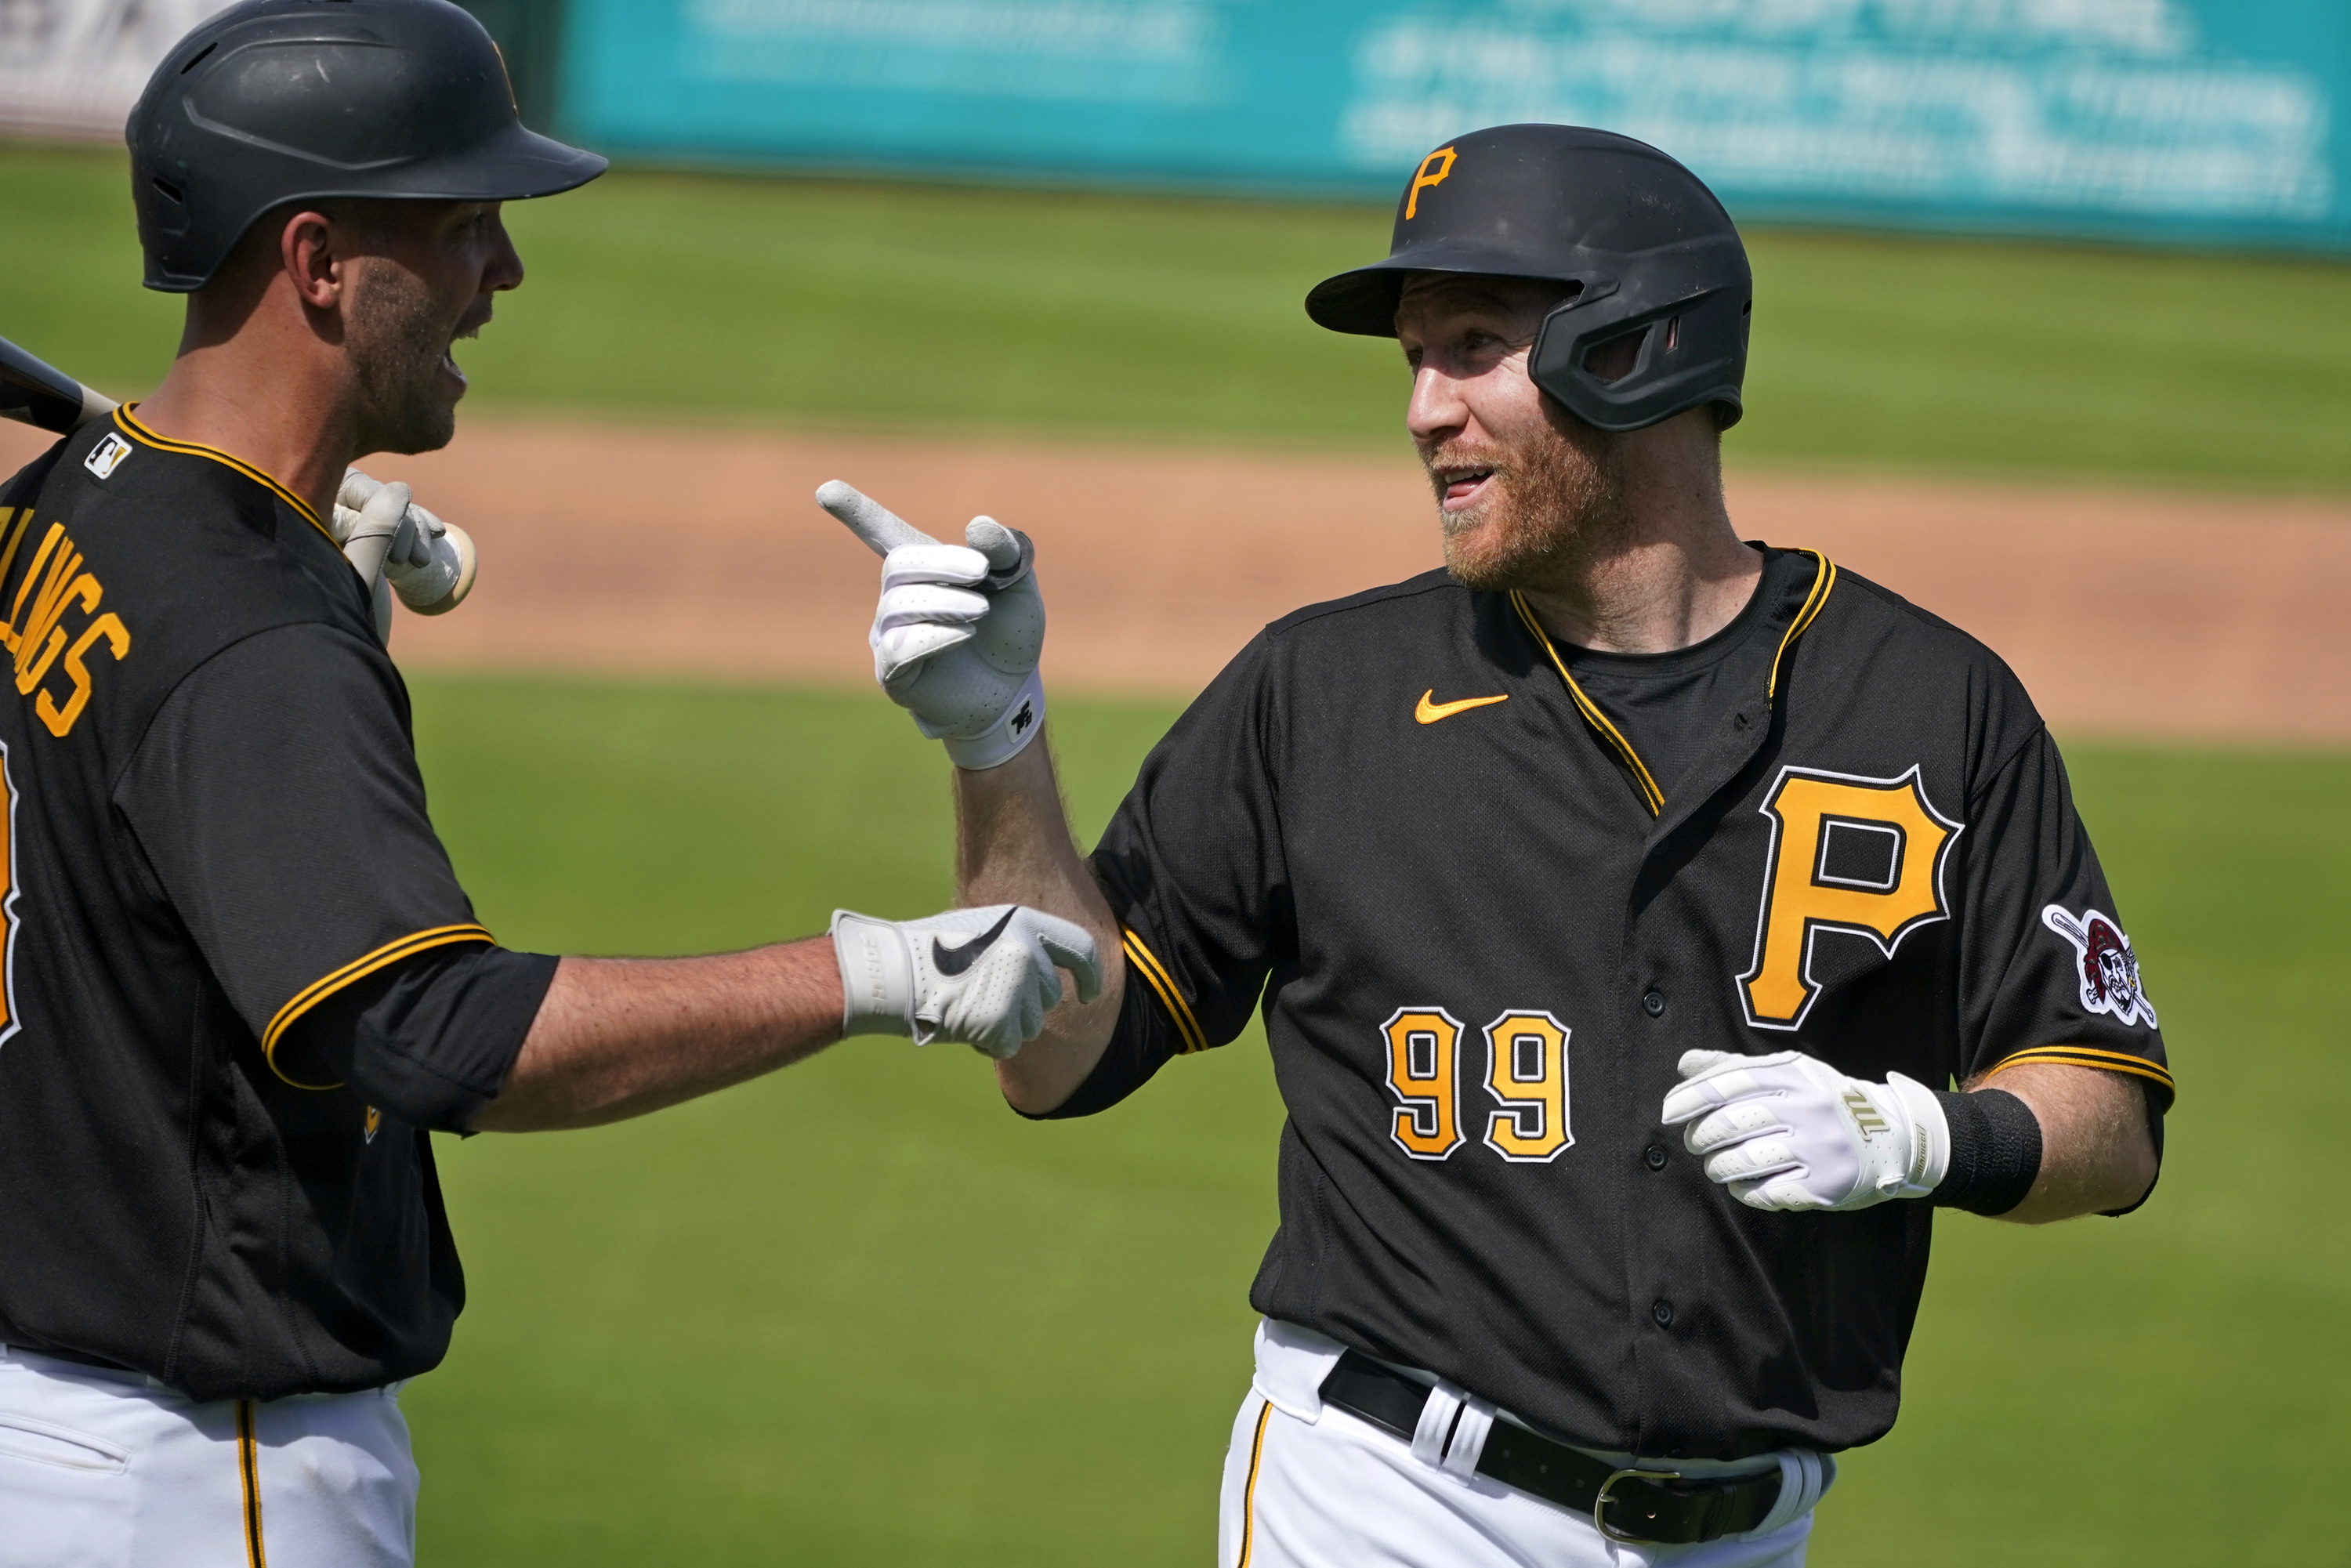 Ex-Yankees, Mets infielder Todd Frazier, N.J. native and Rutgers alum,  impresses at Pirates spring training 